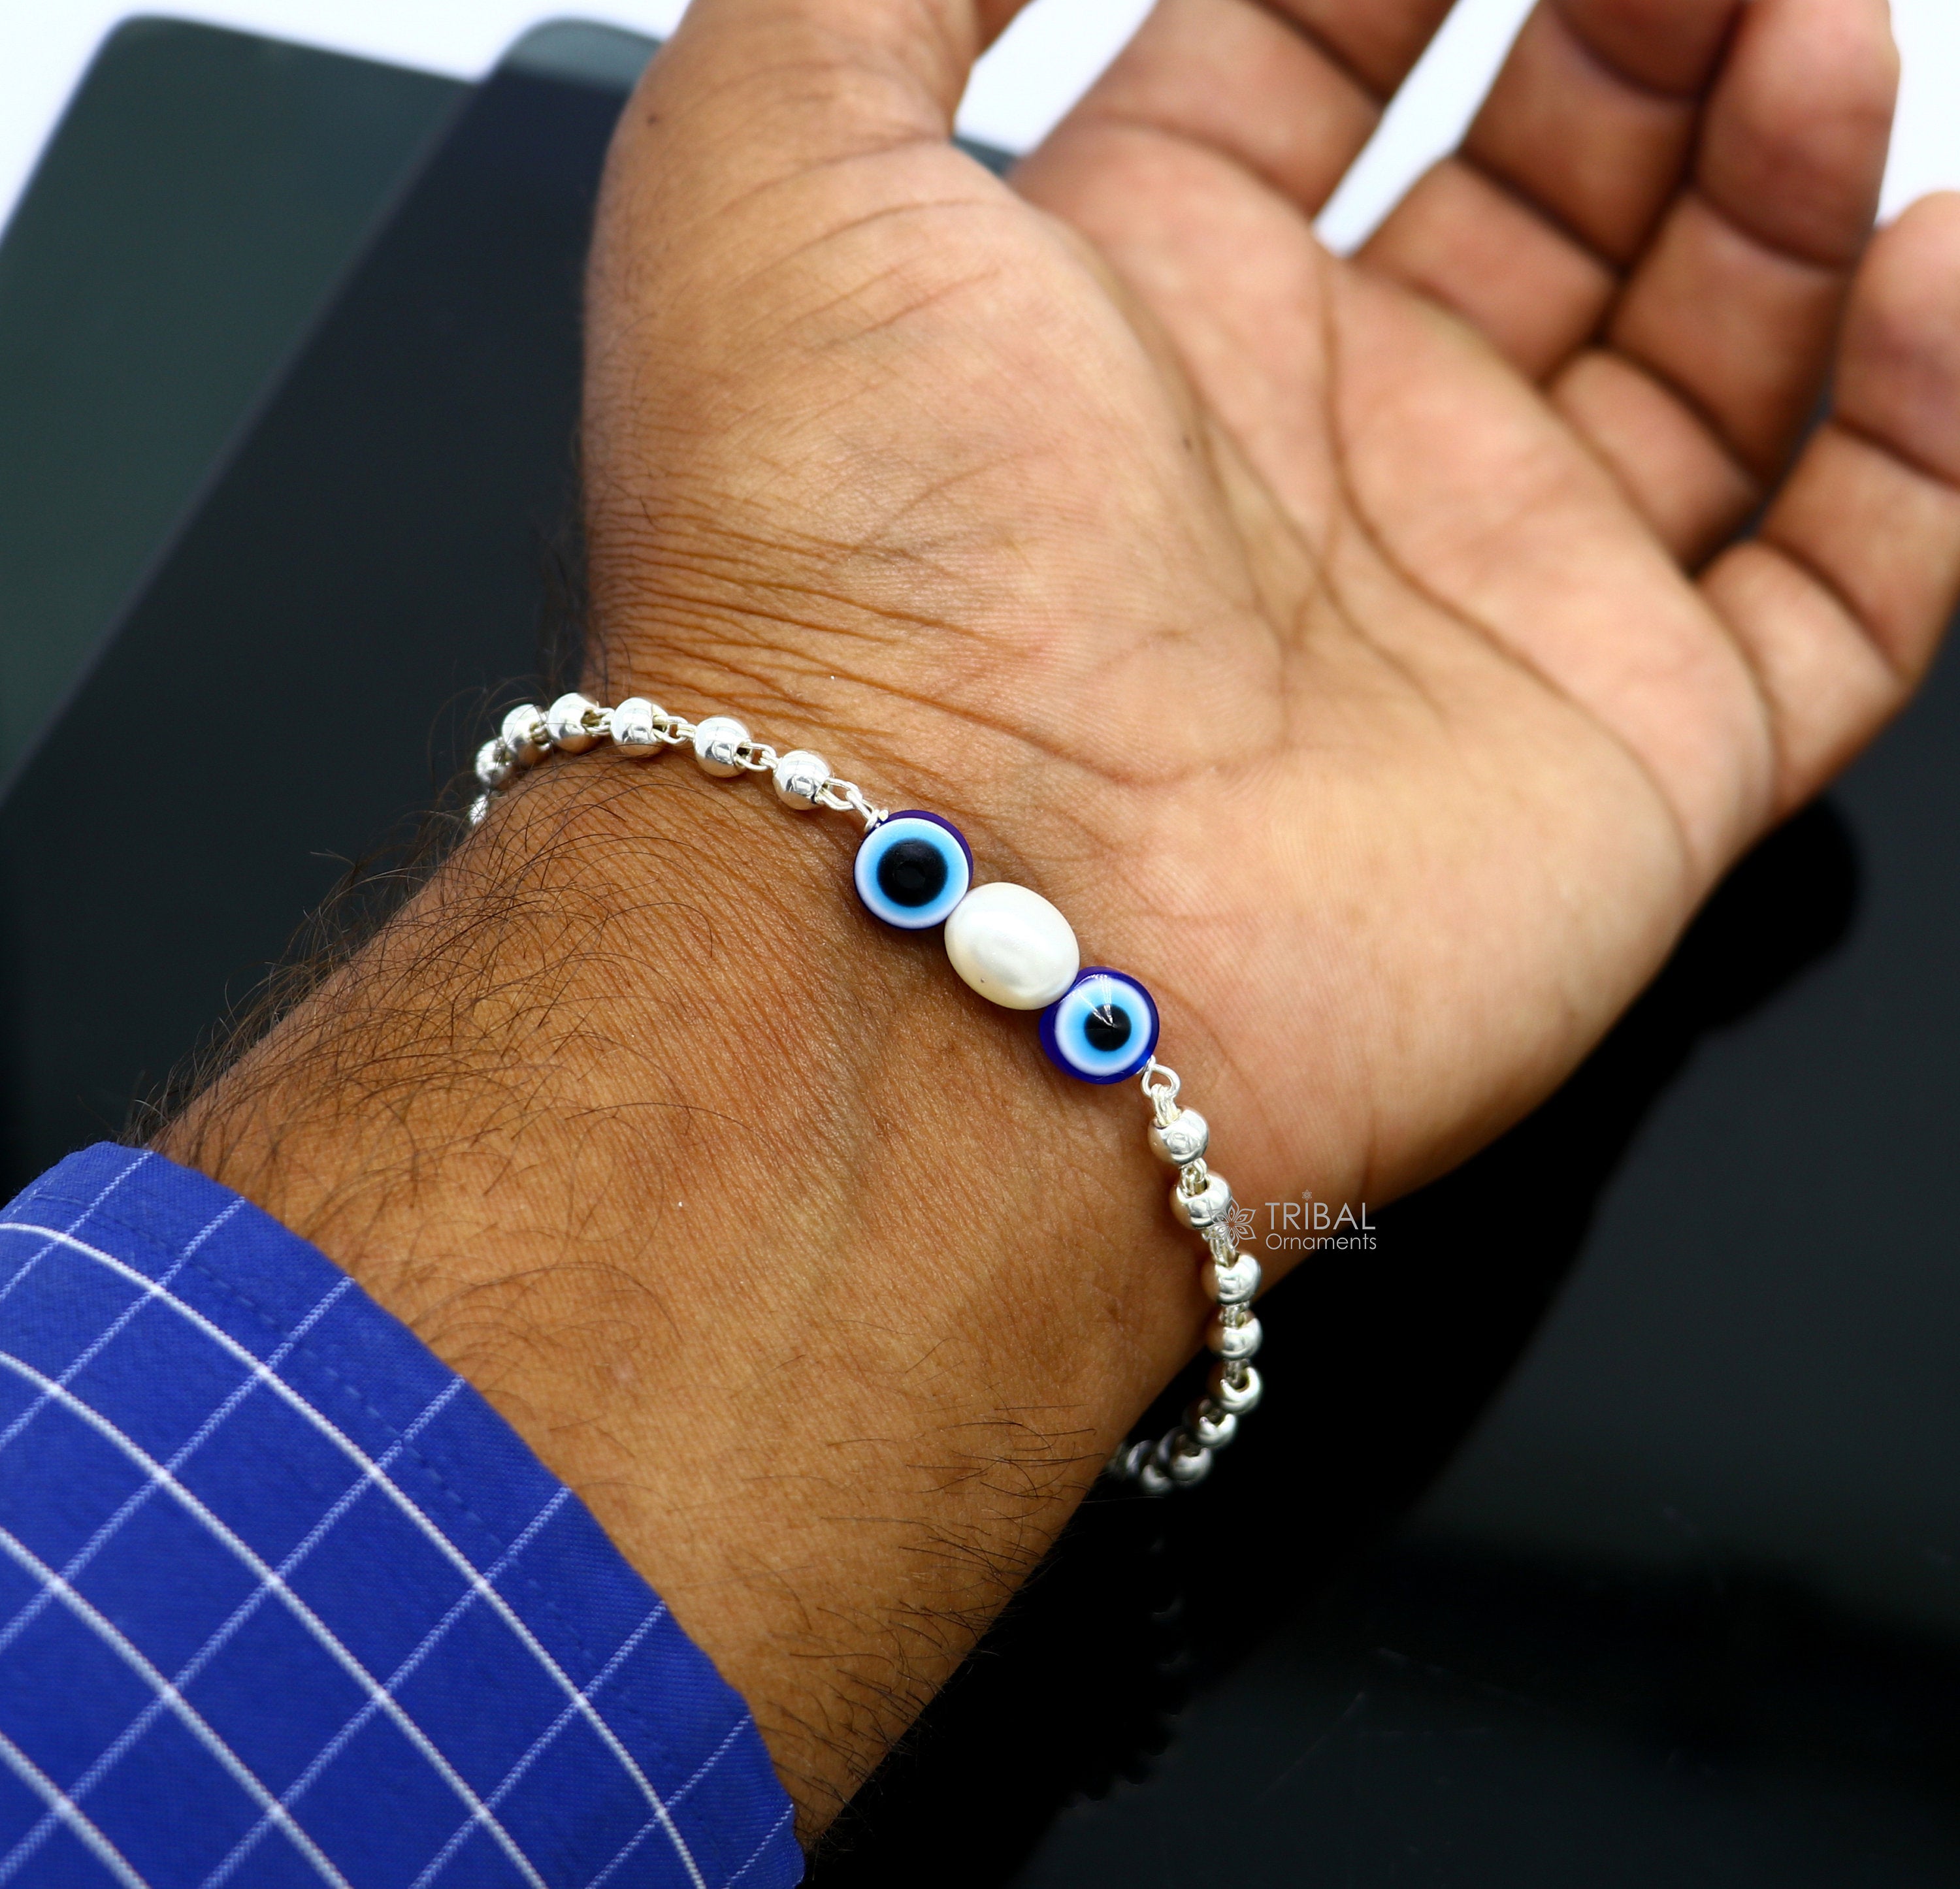 An Excellent Bracelet for The Evil Eye: Ward Off Negativity in Style!